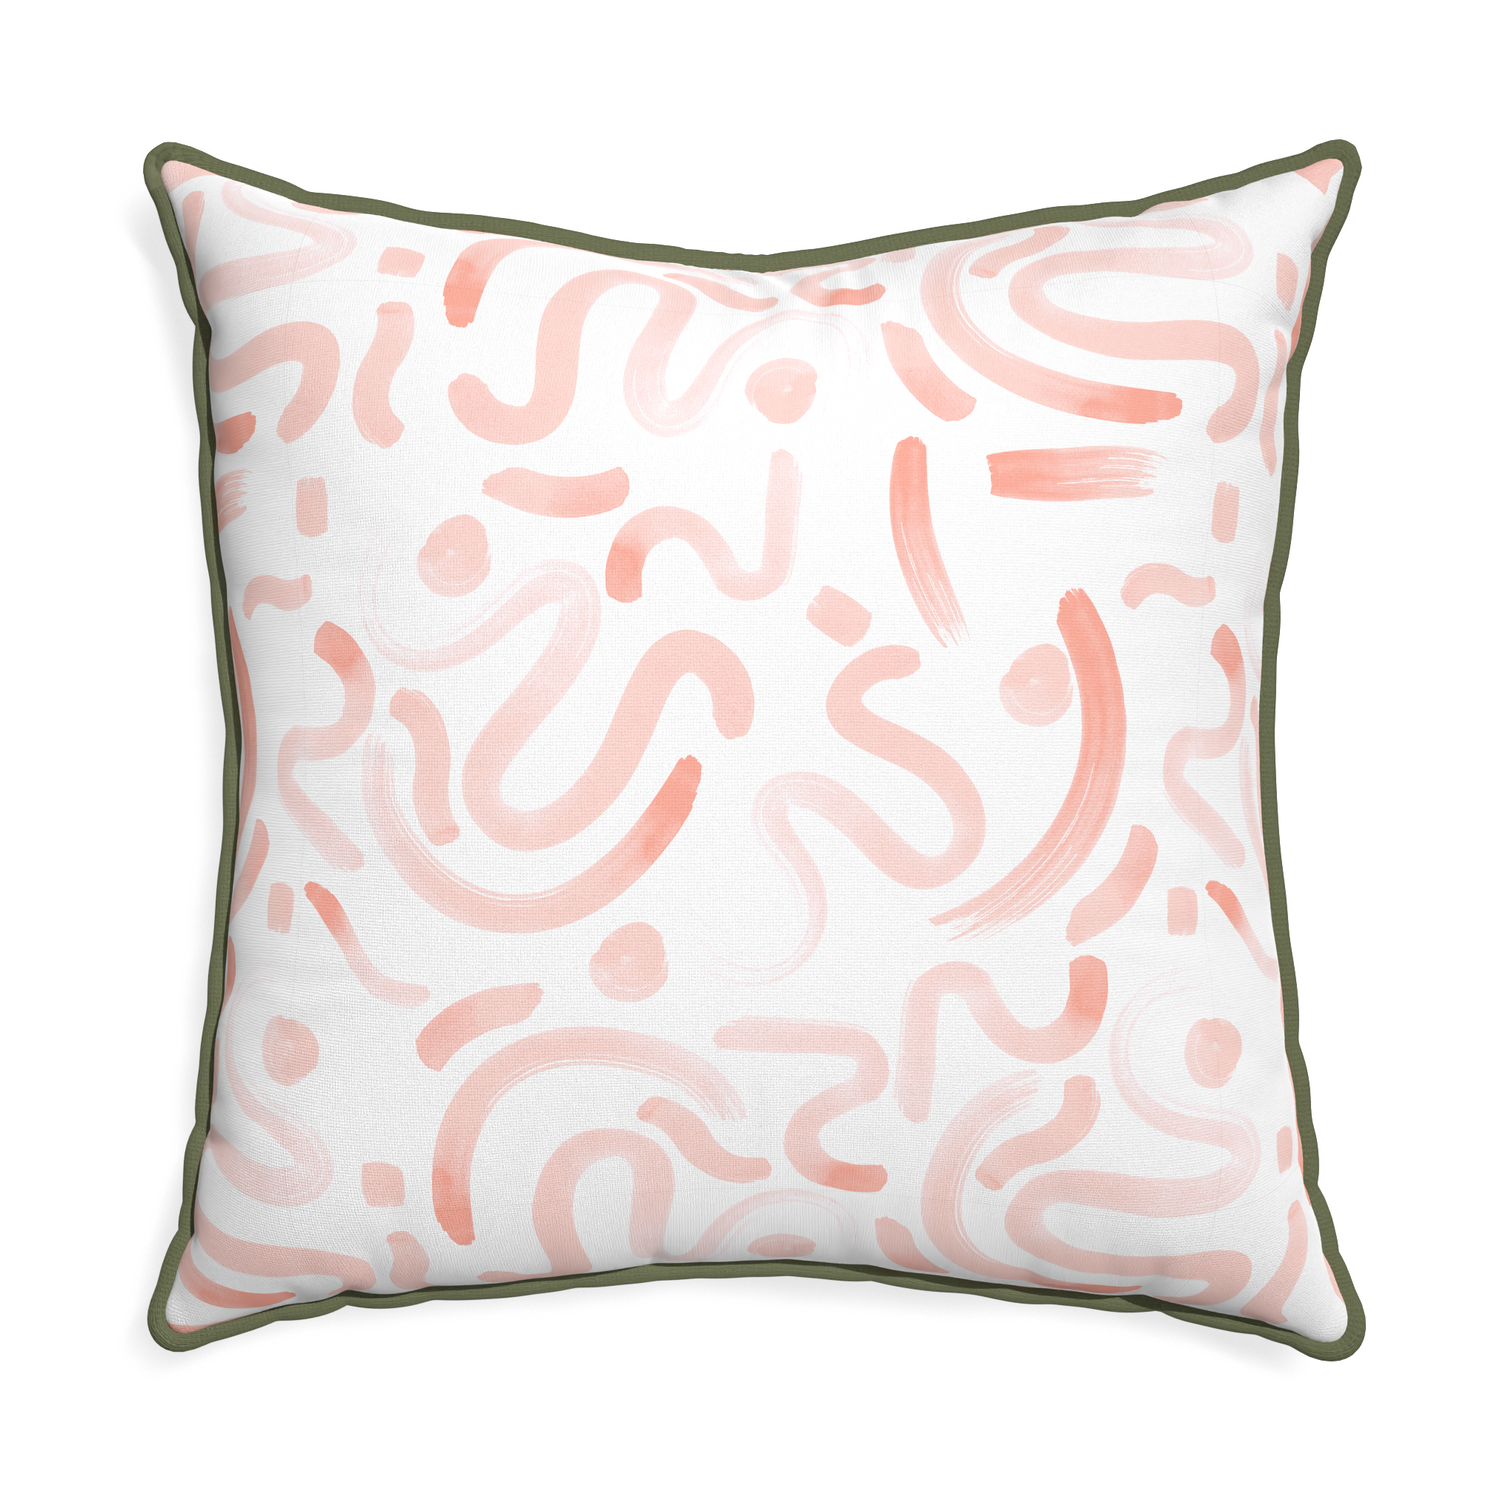 Euro-sham hockney pink custom pillow with f piping on white background